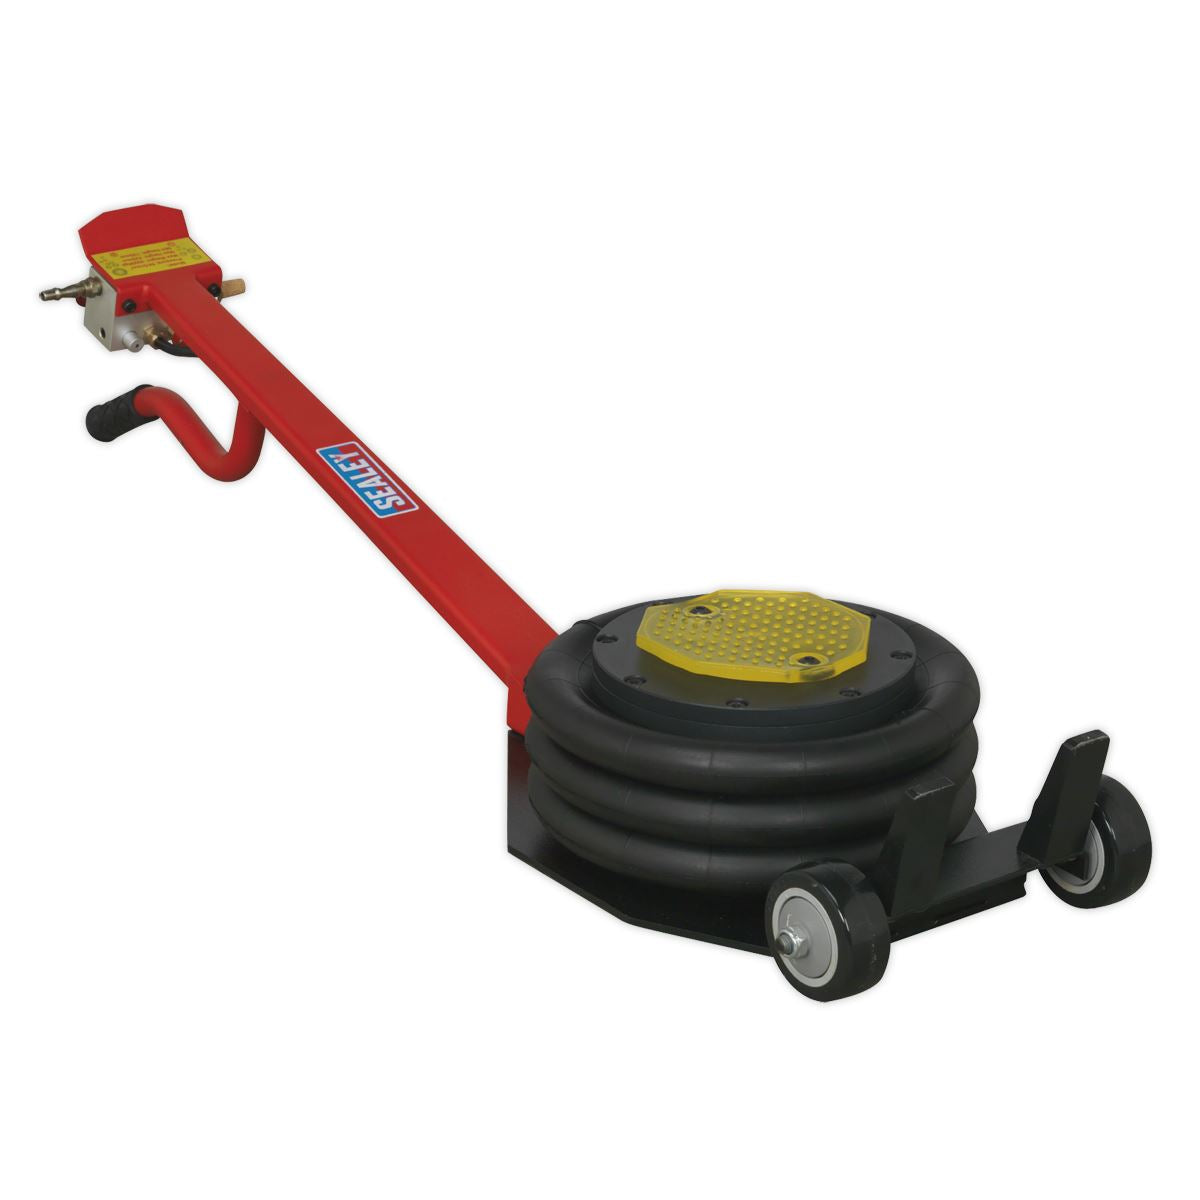 Sealey Premier Premier Air Operated Long Handle Fast 3-Stage Jack 3 Tonne